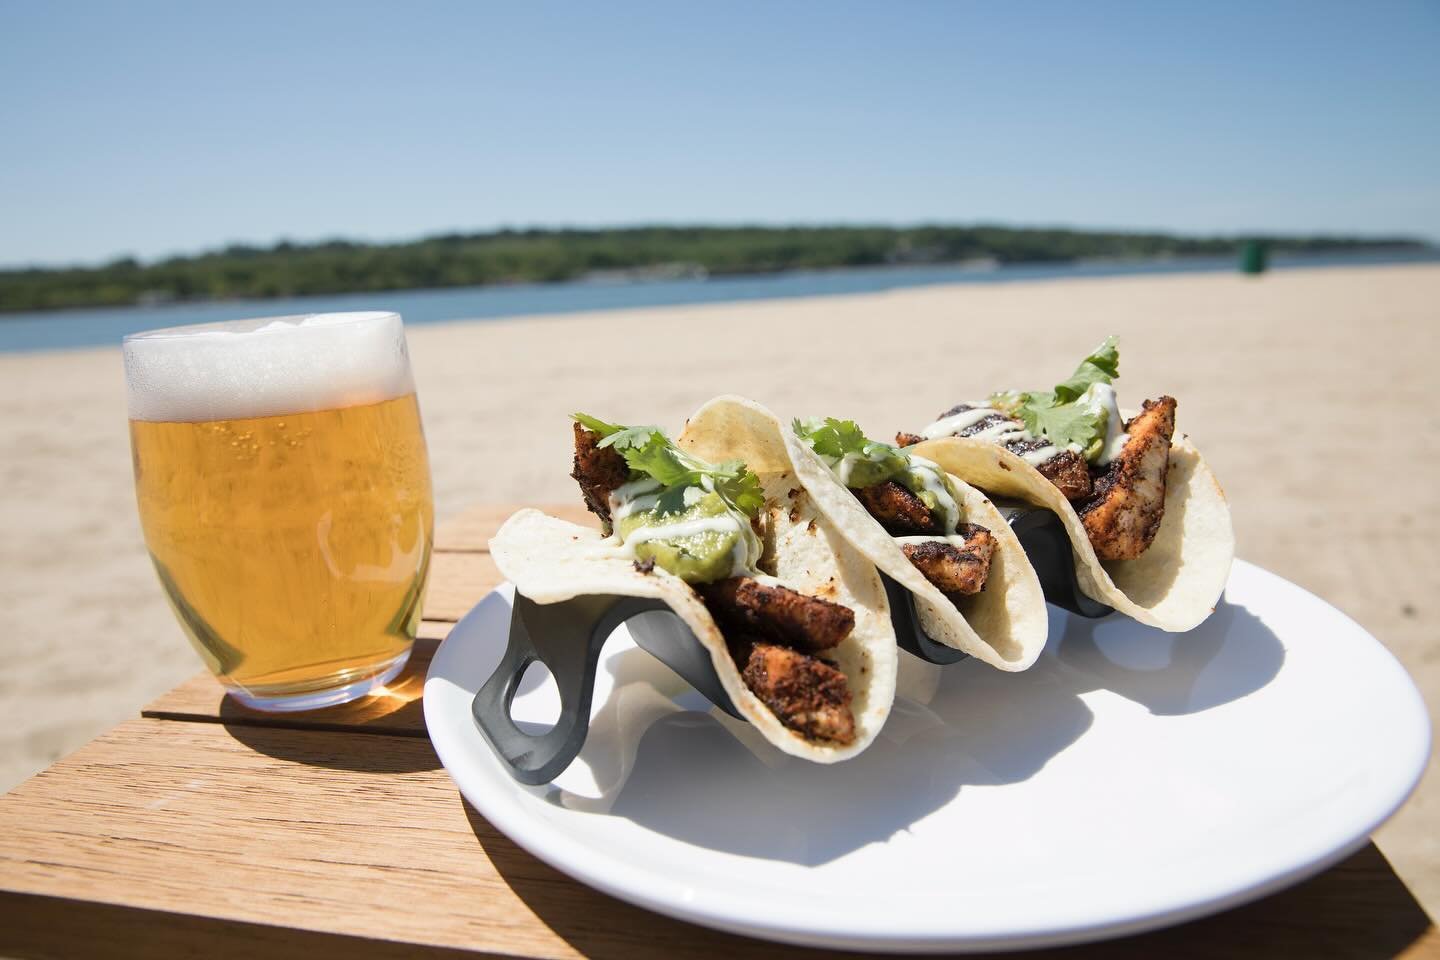 🐠 + 🌮 + 🏖️ = 😃 

☀️ Officially open for the SZN 
🍽️ Open 7 days a week for lunch and dinner until leaf peeping SZN